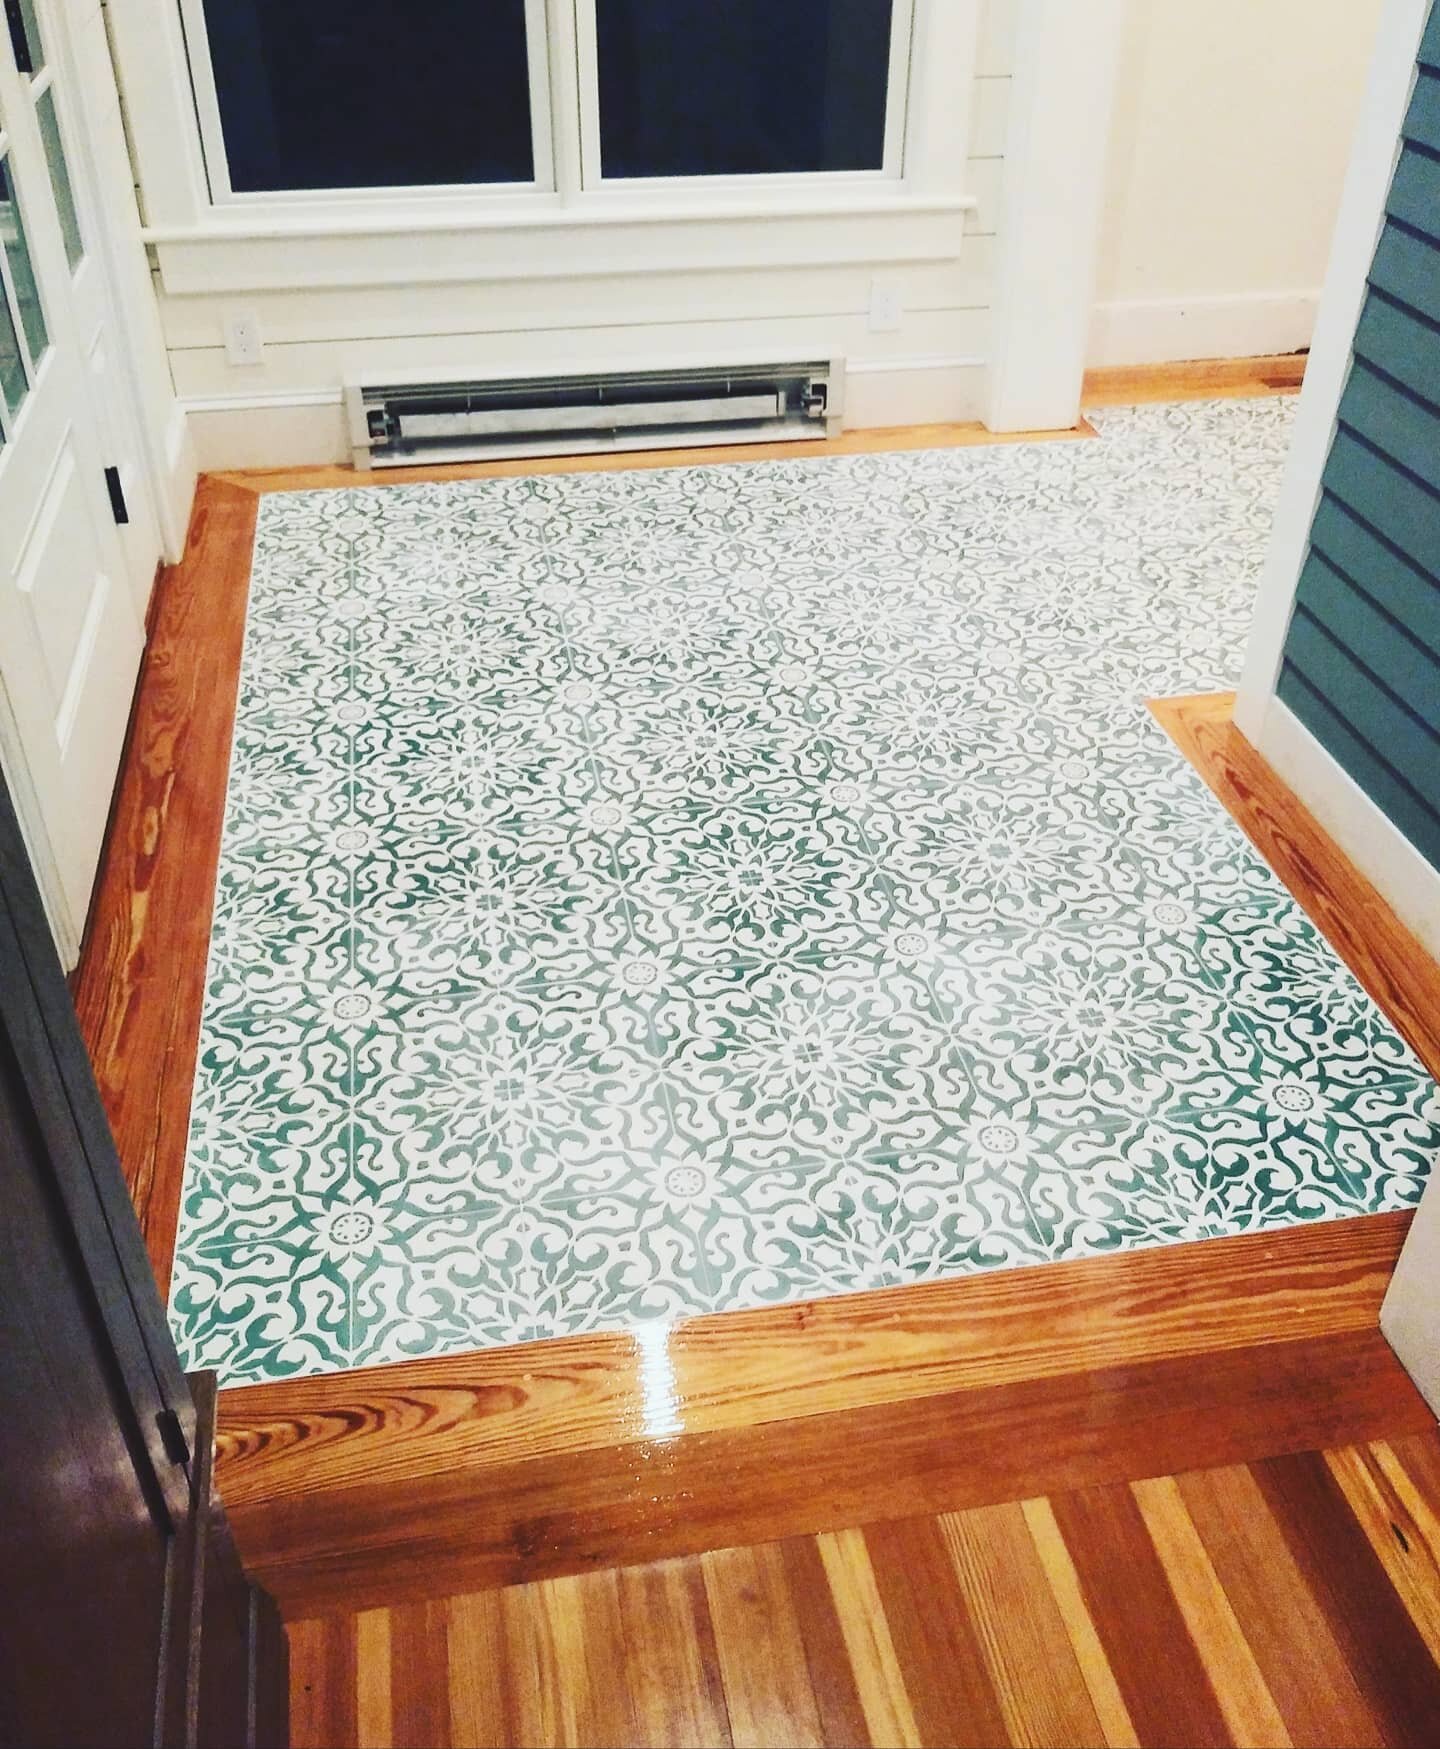 Looking to revamp the entryway of your home? Cement tiles are a fun way to add visual interest. Plus they can handle anything you throw at 'em. 😉 Here, we created a custom wood border using reclaimed lumber. We wanted to match the border to the exis